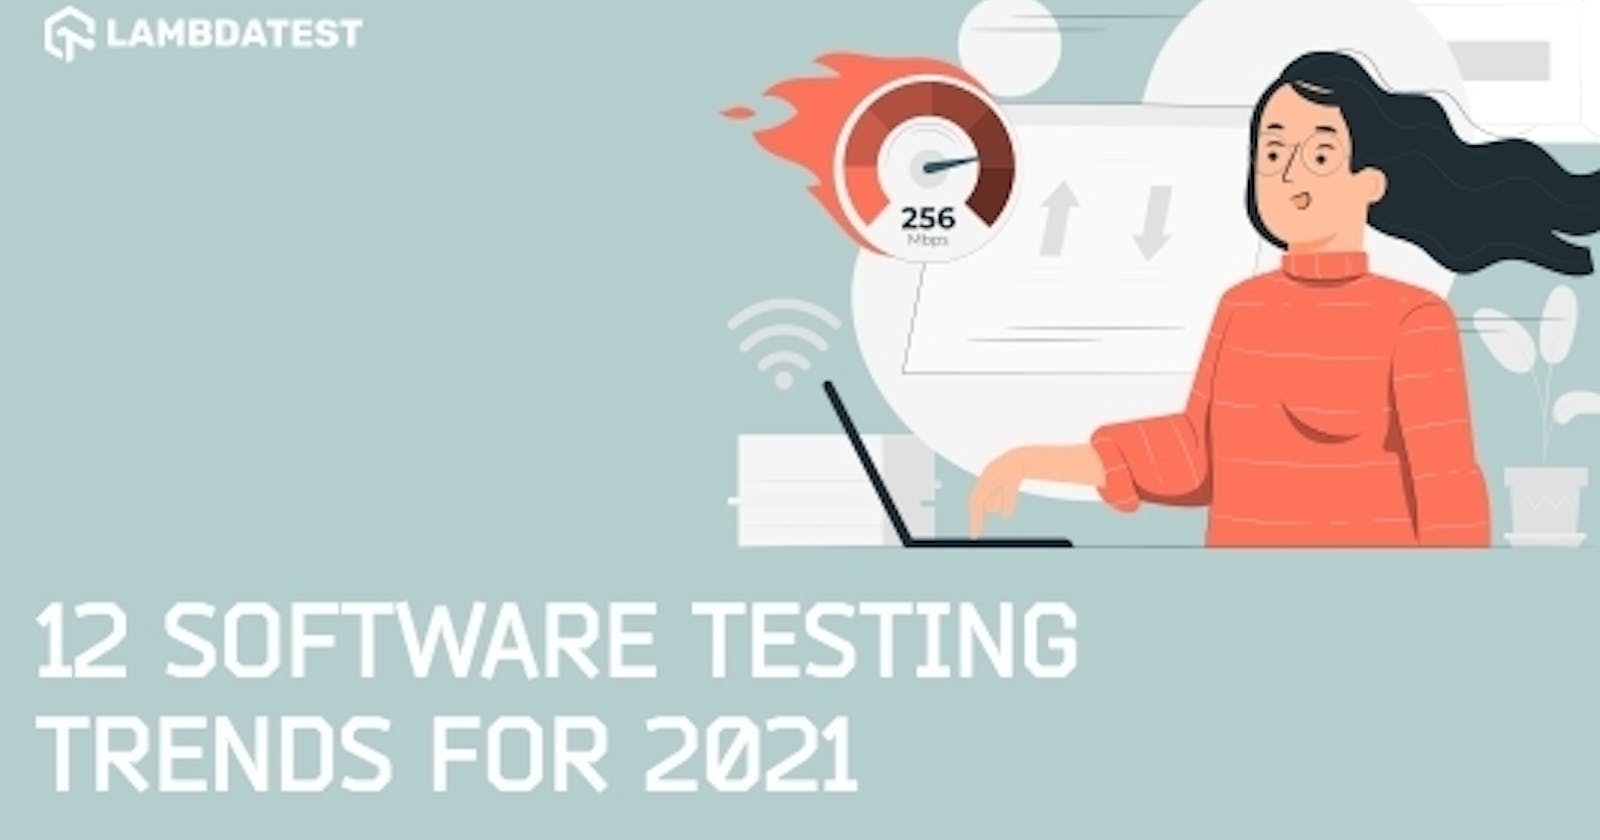 12 Important Software Testing Trends for 2021 You Need to Know